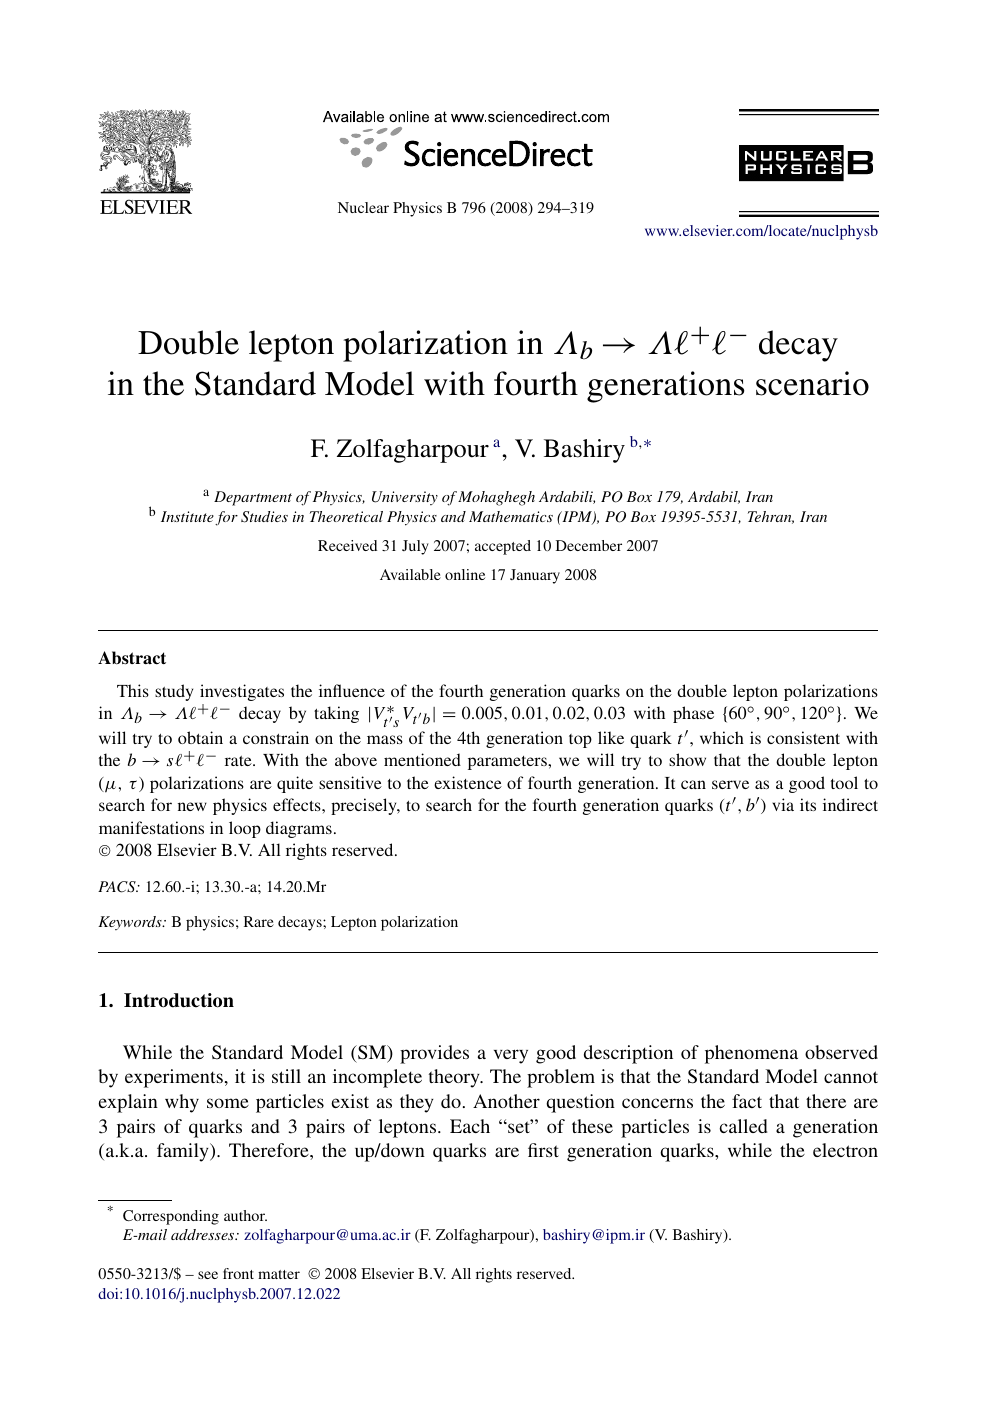 Double Lepton Polarization In Decay In The Standard Model With Fourth Generations Scenario Topic Of Research Paper In Physical Sciences Download Scholarly Article Pdf And Read For Free On Cyberleninka Open